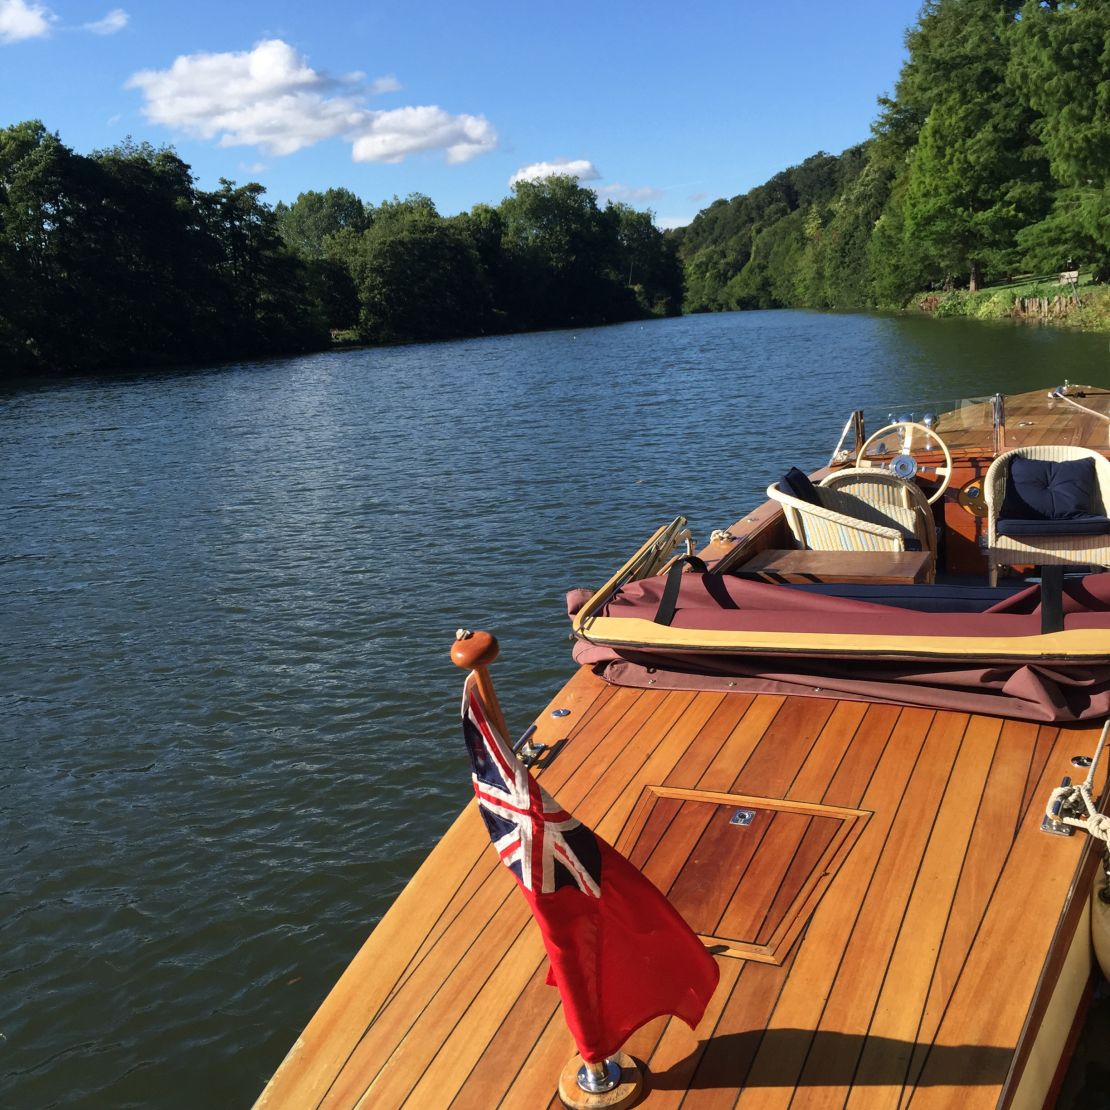 Cliveden House's vintage boats take guests on a jaunt down the River Thames.